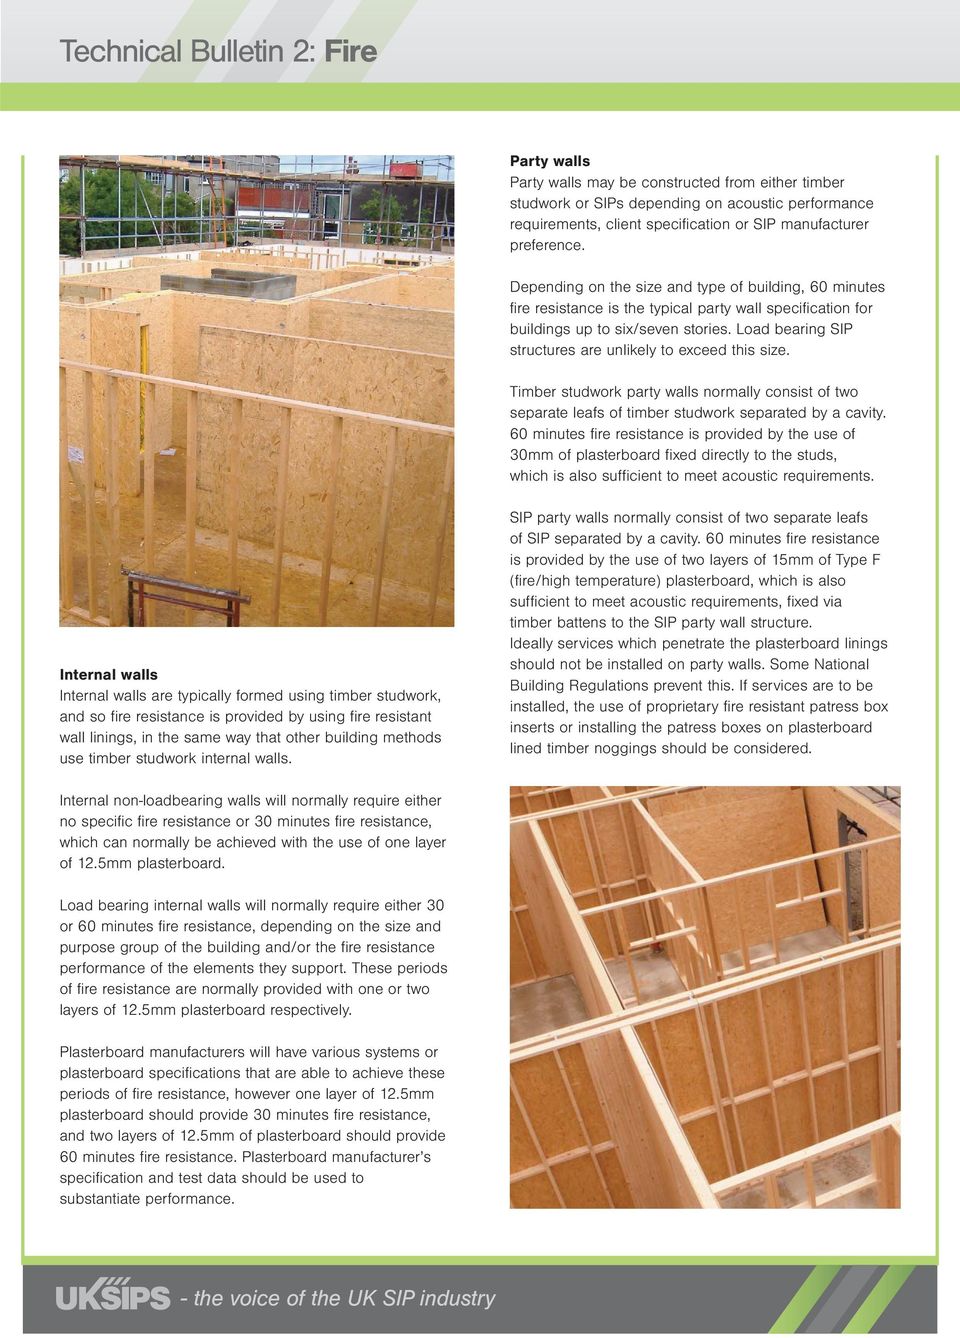 Load bearing SIP structures are unlikely to exceed this size. Timber studwork party walls normally consist of two separate leafs of timber studwork separated by a cavity.